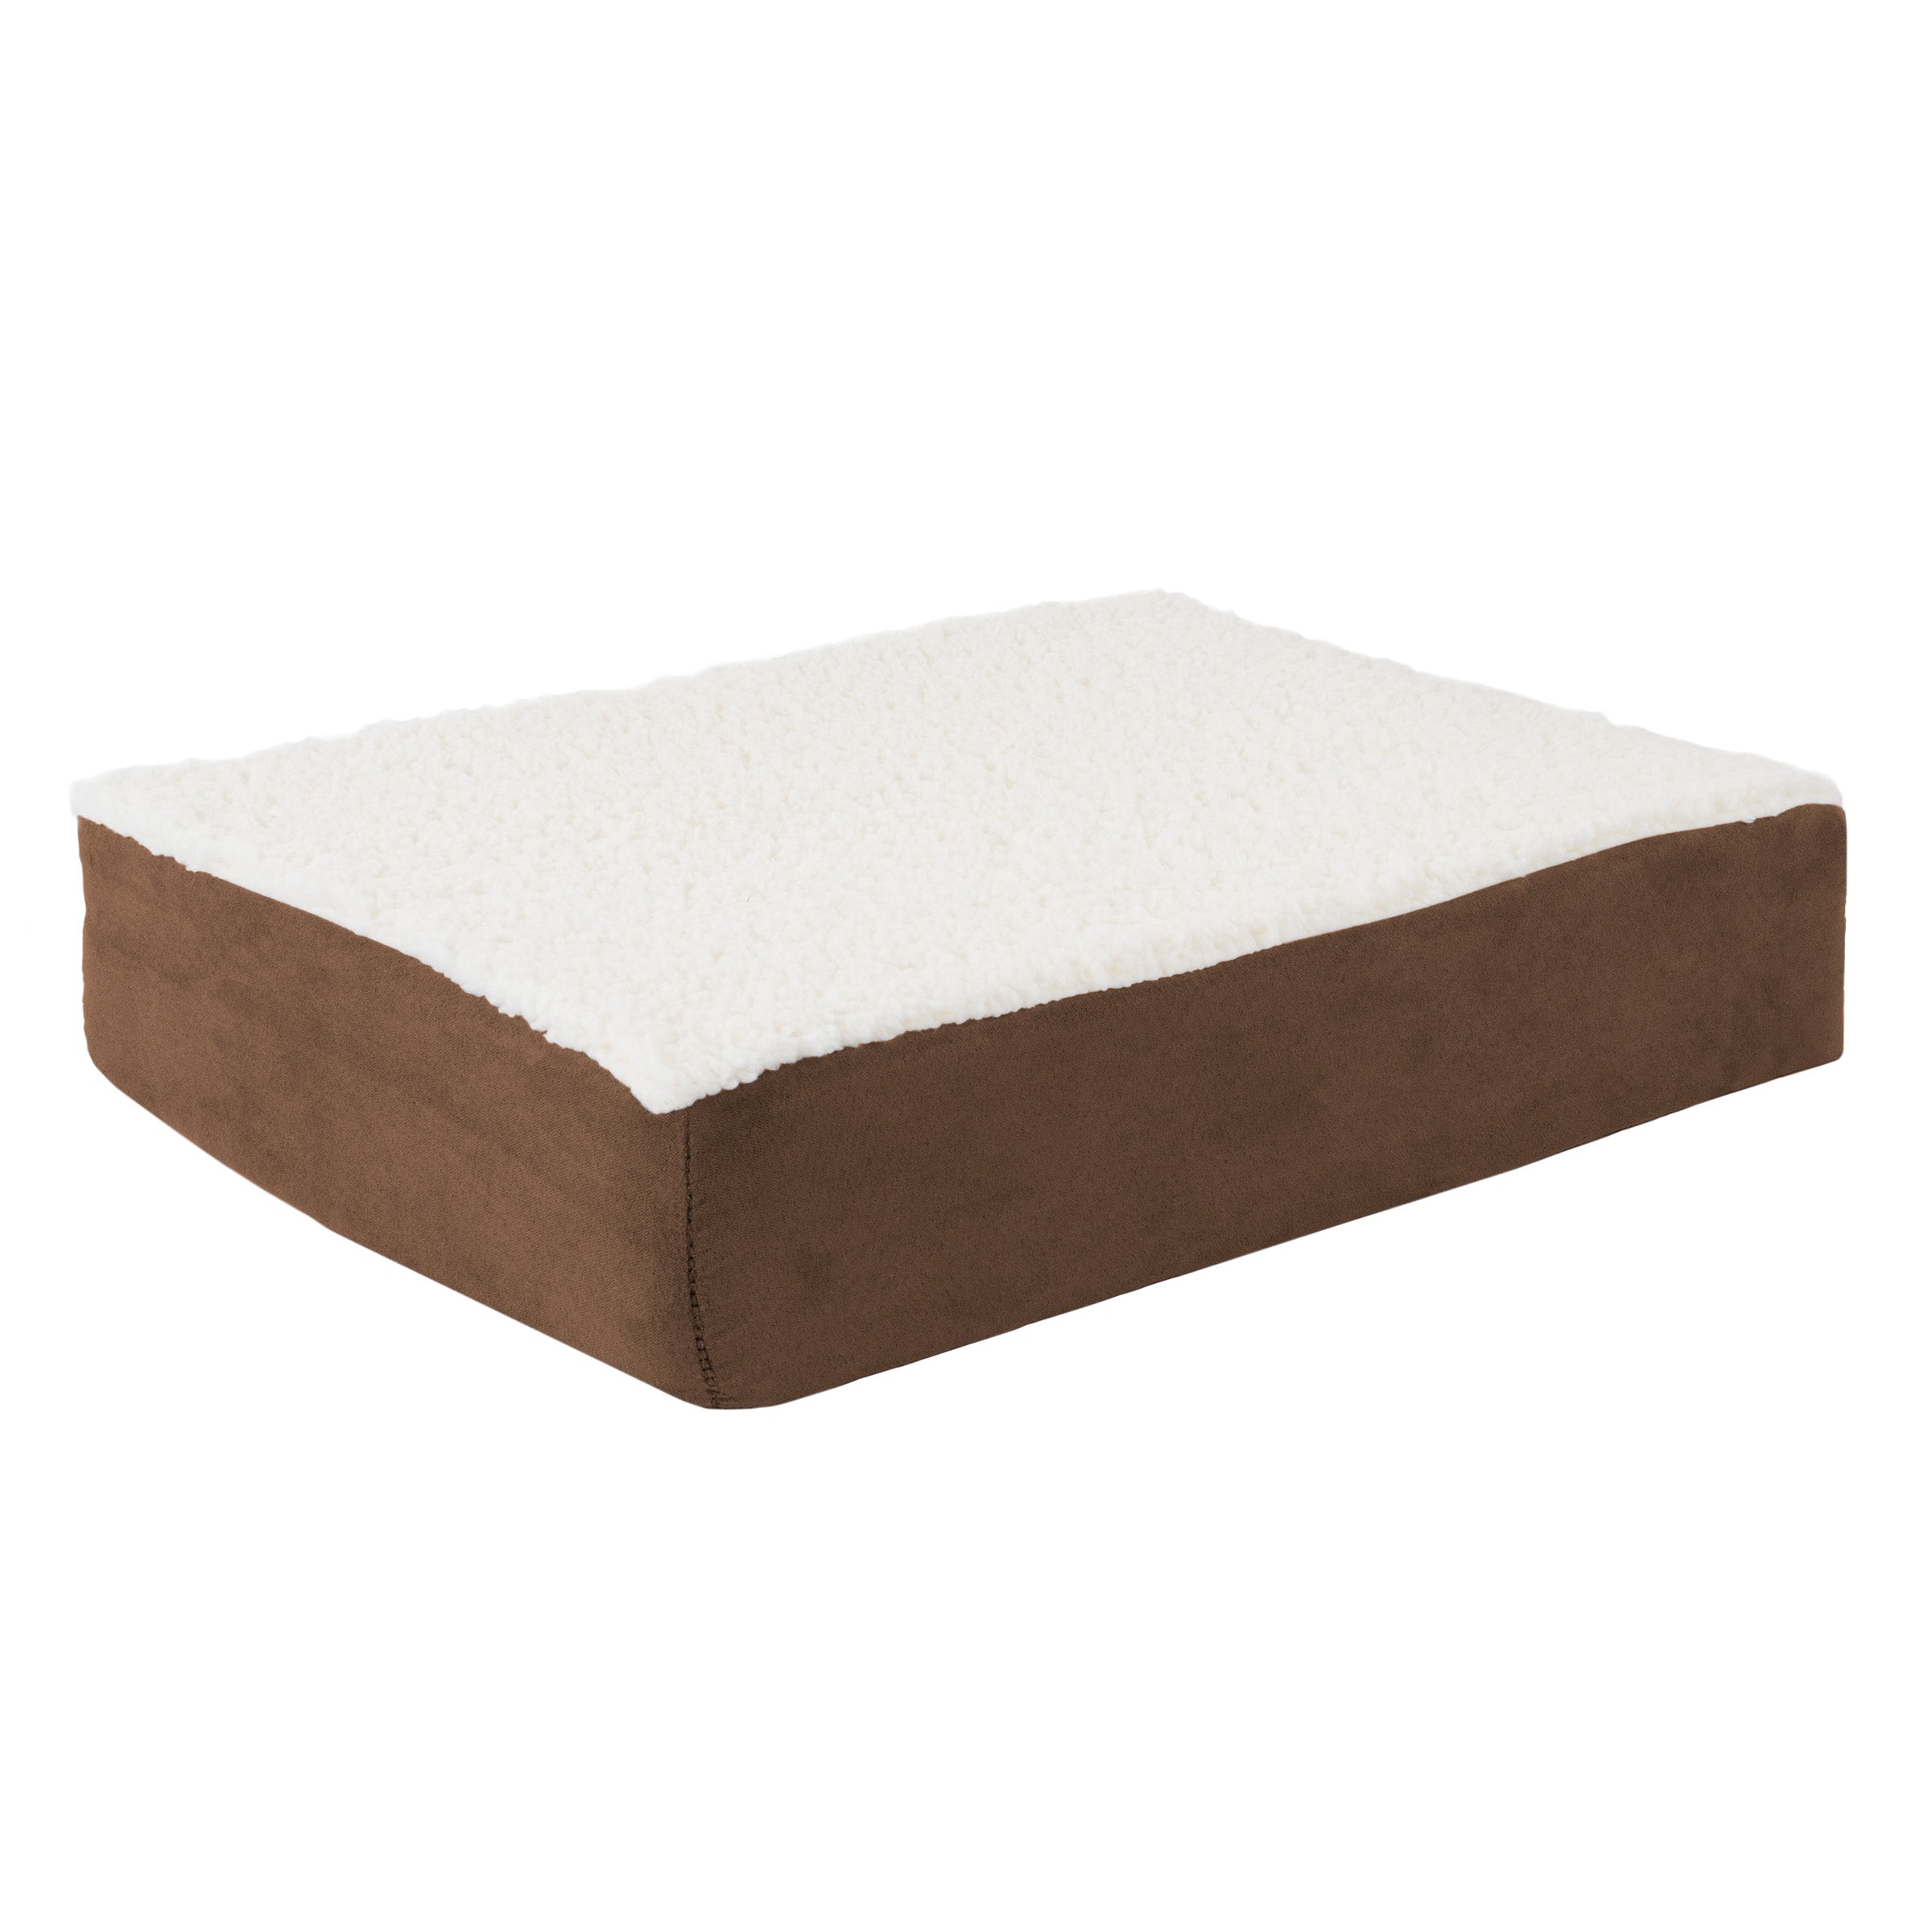 Dog Bed Orthopedic Sherpa Top Pet Bed with Memory Foam and Removable Cover 20x15x4 Brown